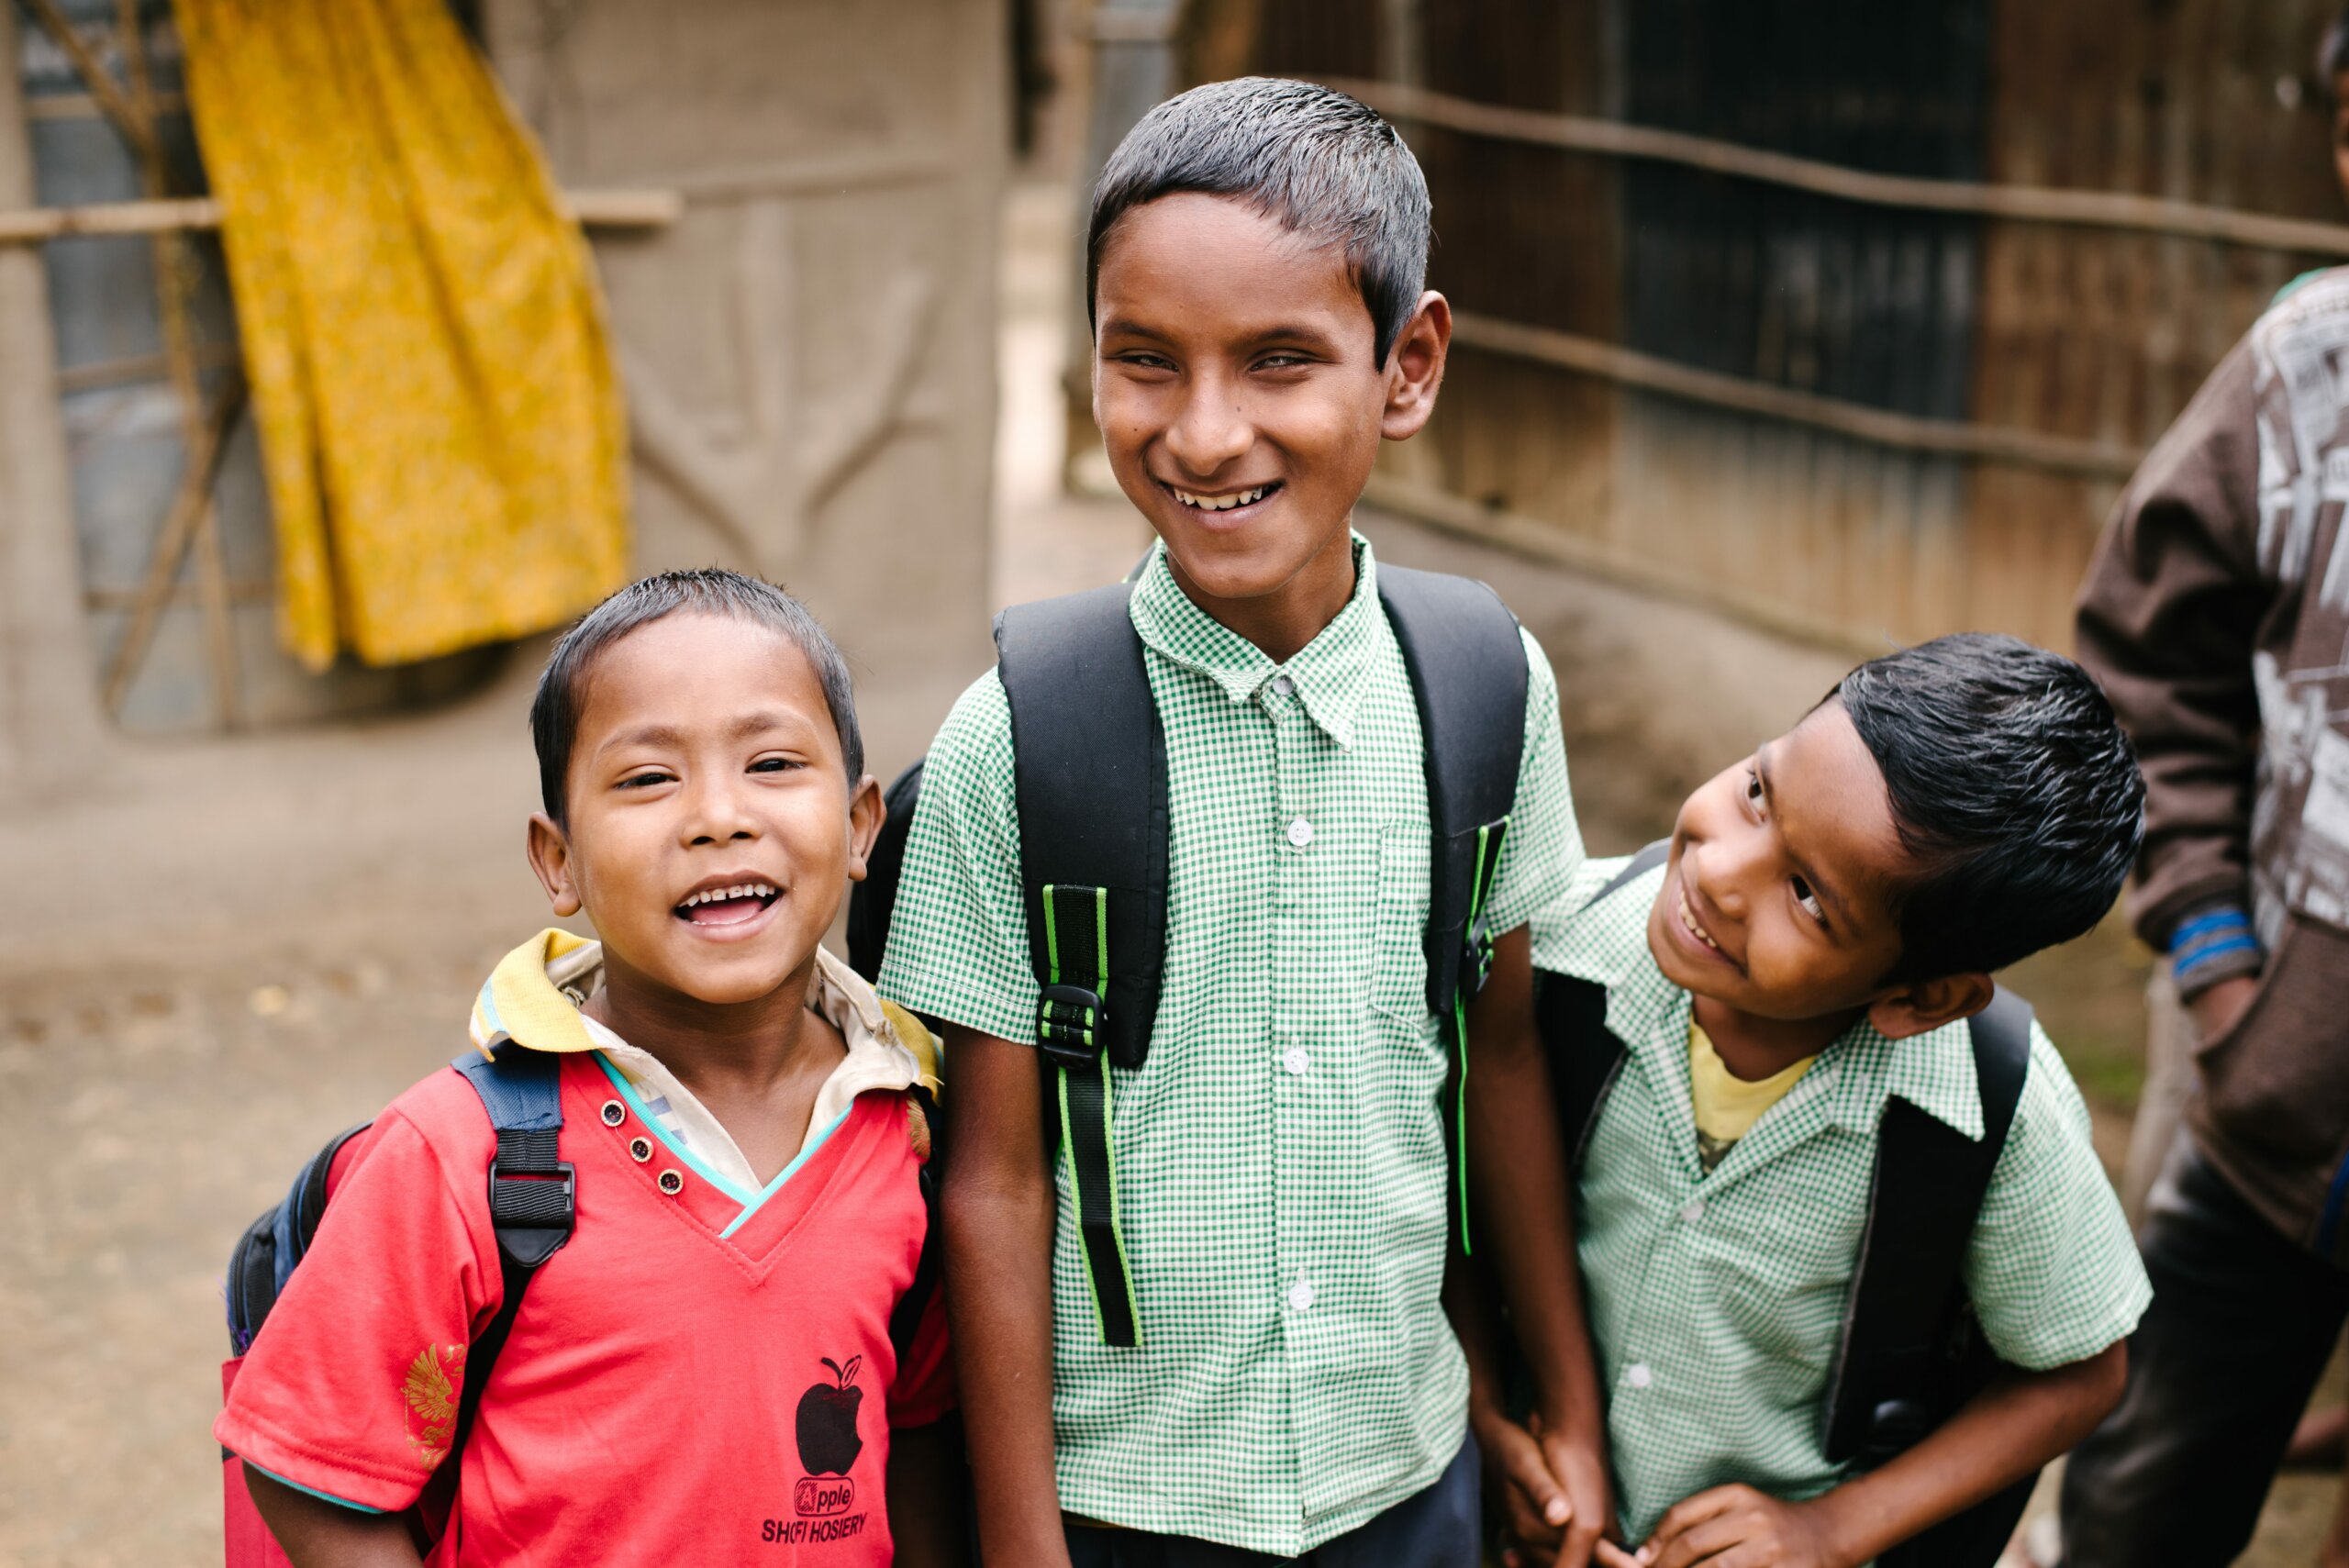 Ten year-old Naresh is blind. He stands and laughs with his two friends on their way to school